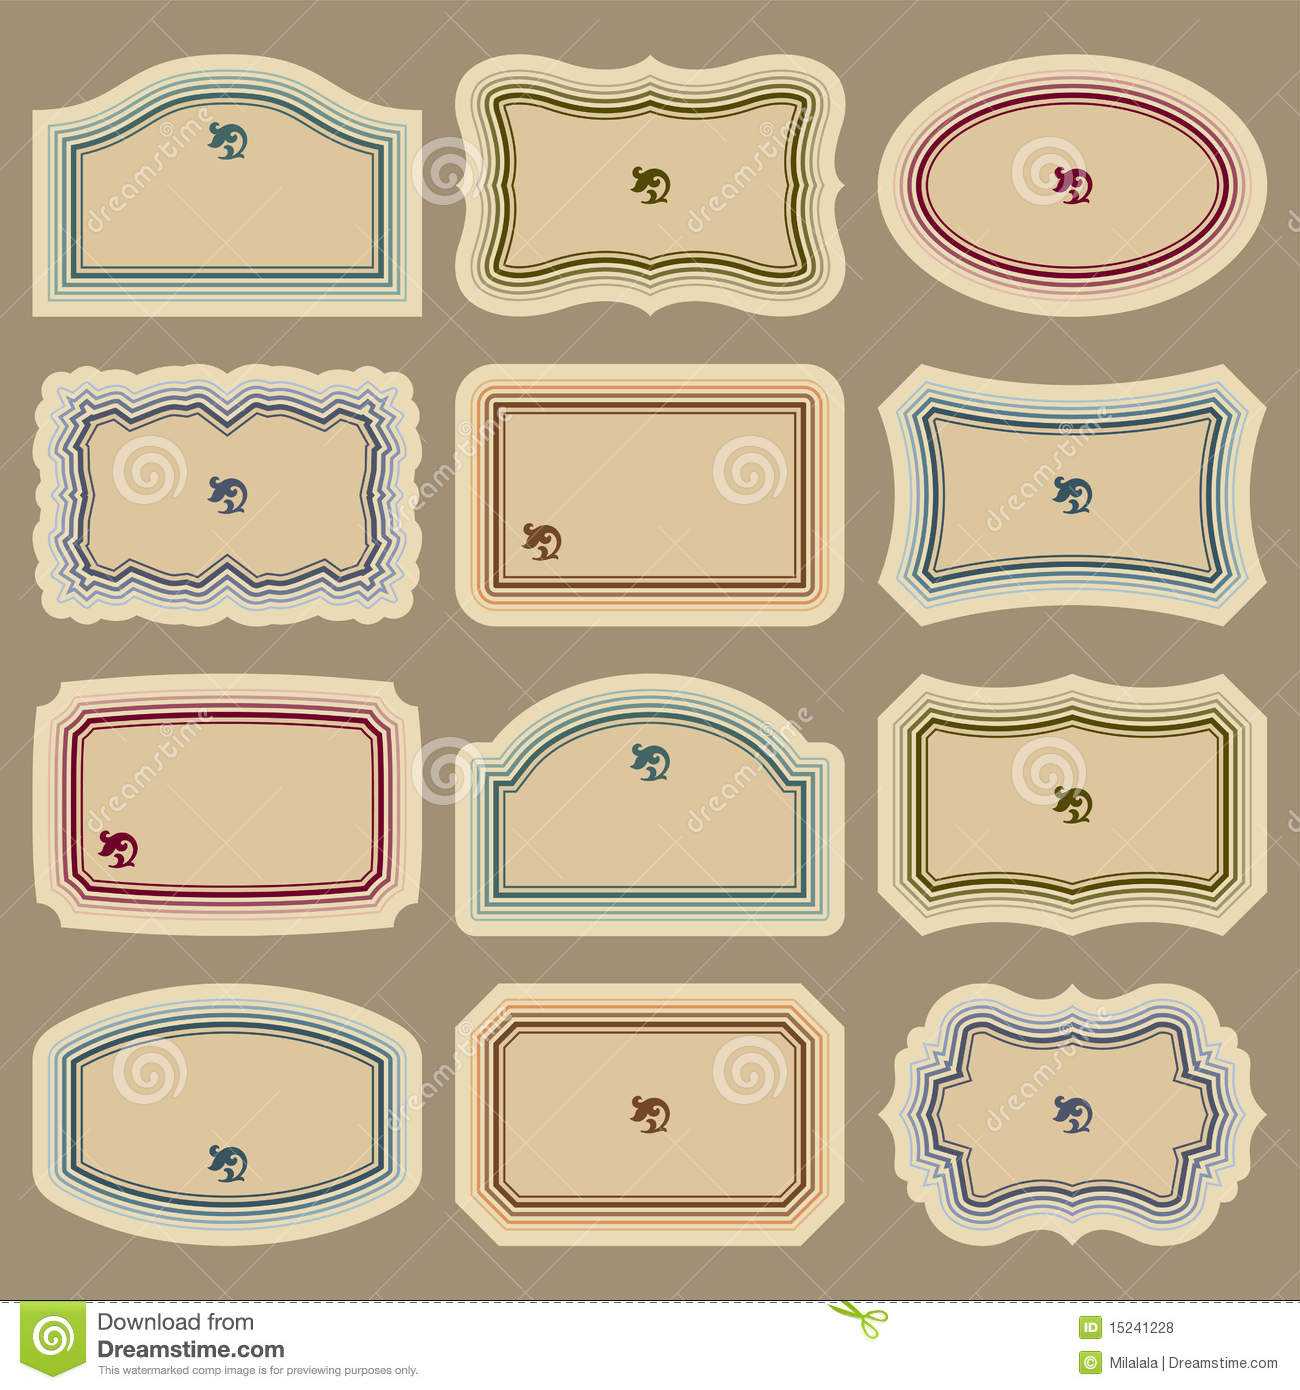 7 Blank Vintage Label Vector Images – Free Printable Blank With Decorative Label Templates Free